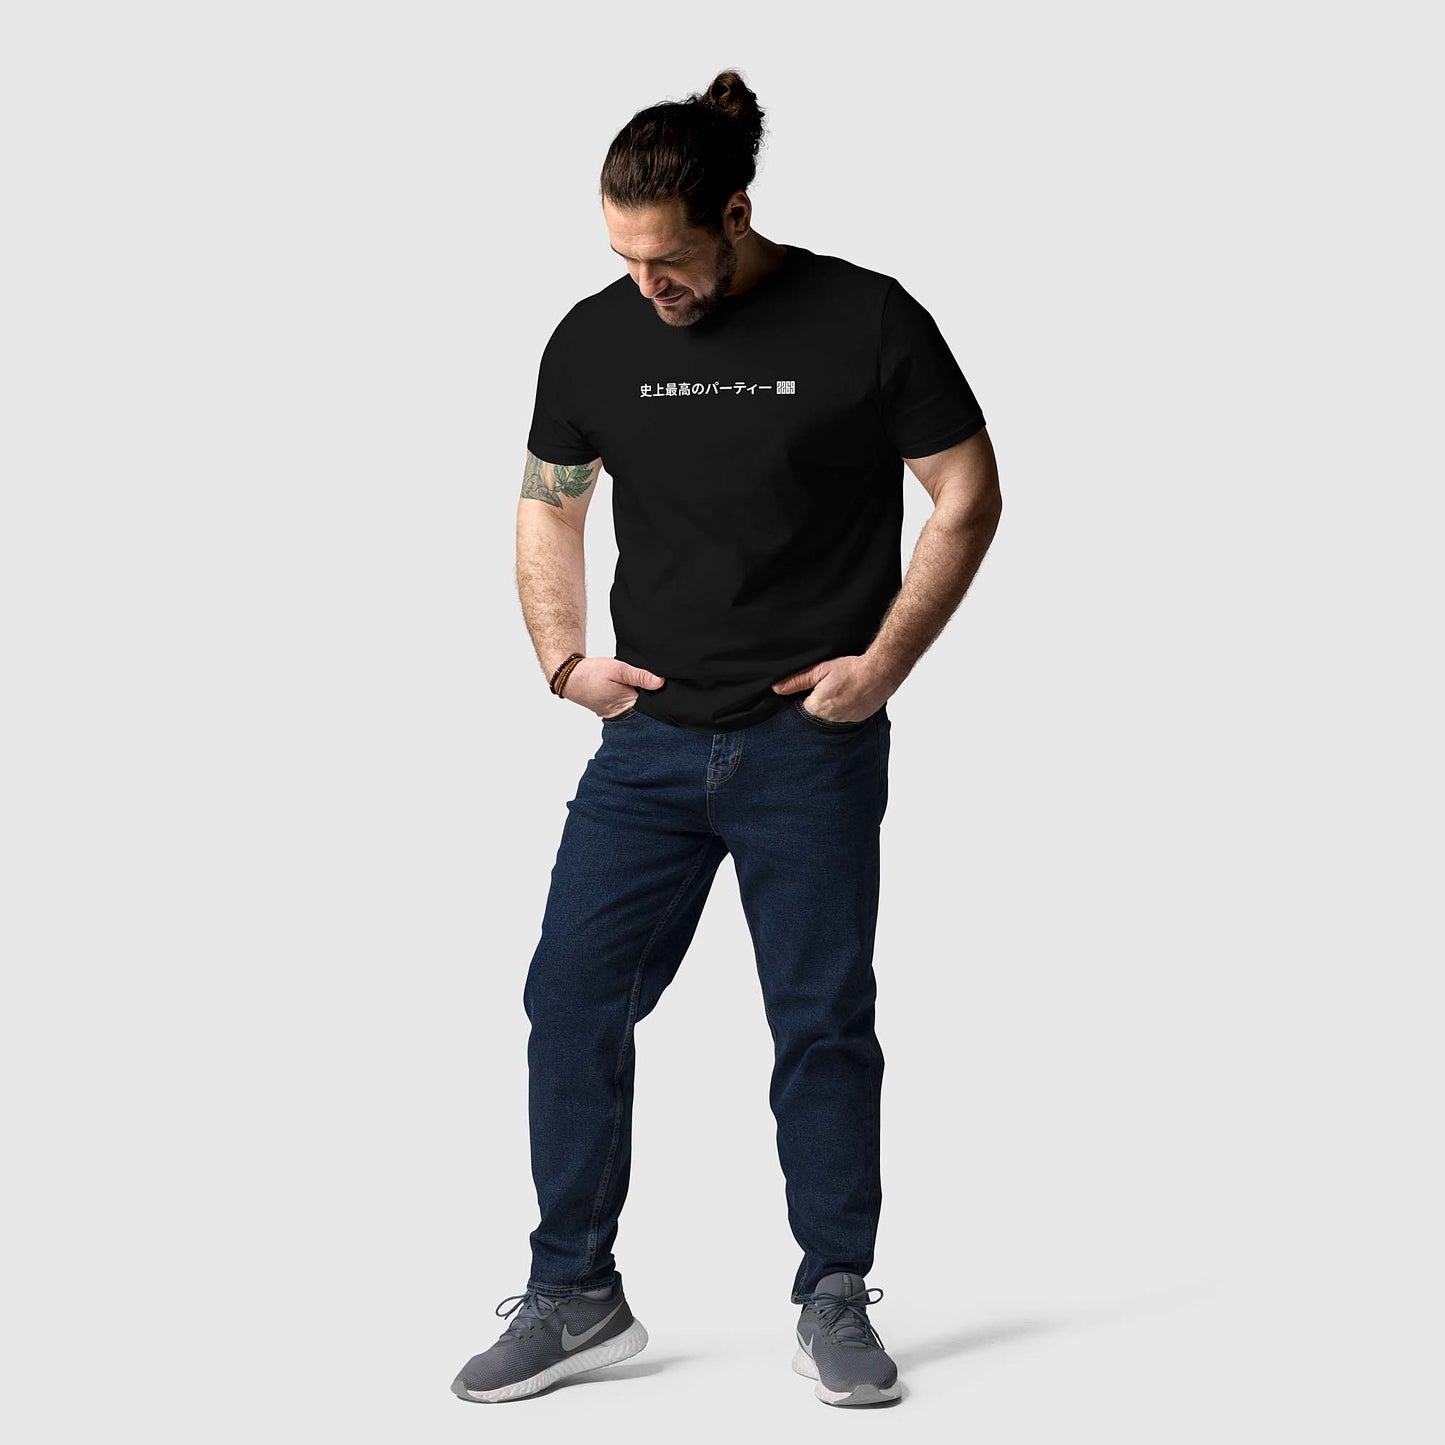 Men's black organic cotton t-shirt with Japanese 2269 party message